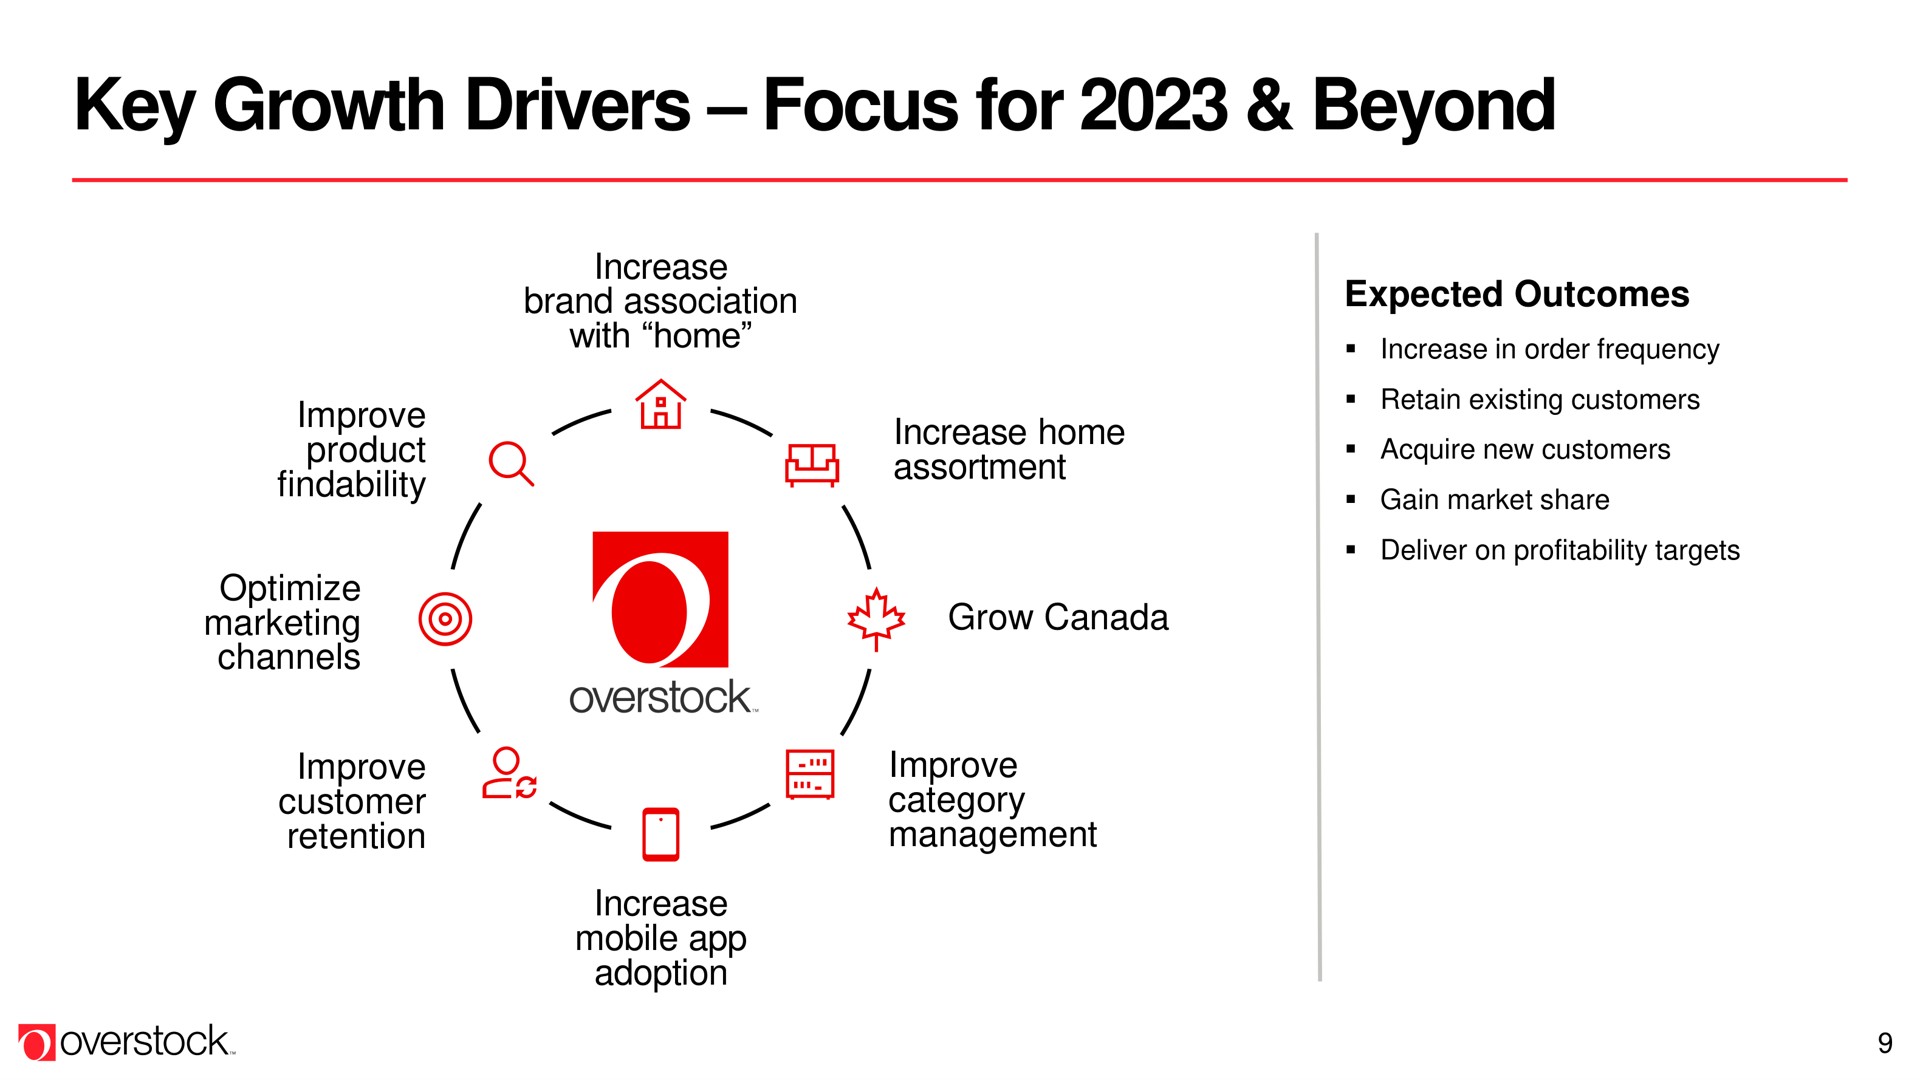 key growth drivers focus for beyond | Overstock